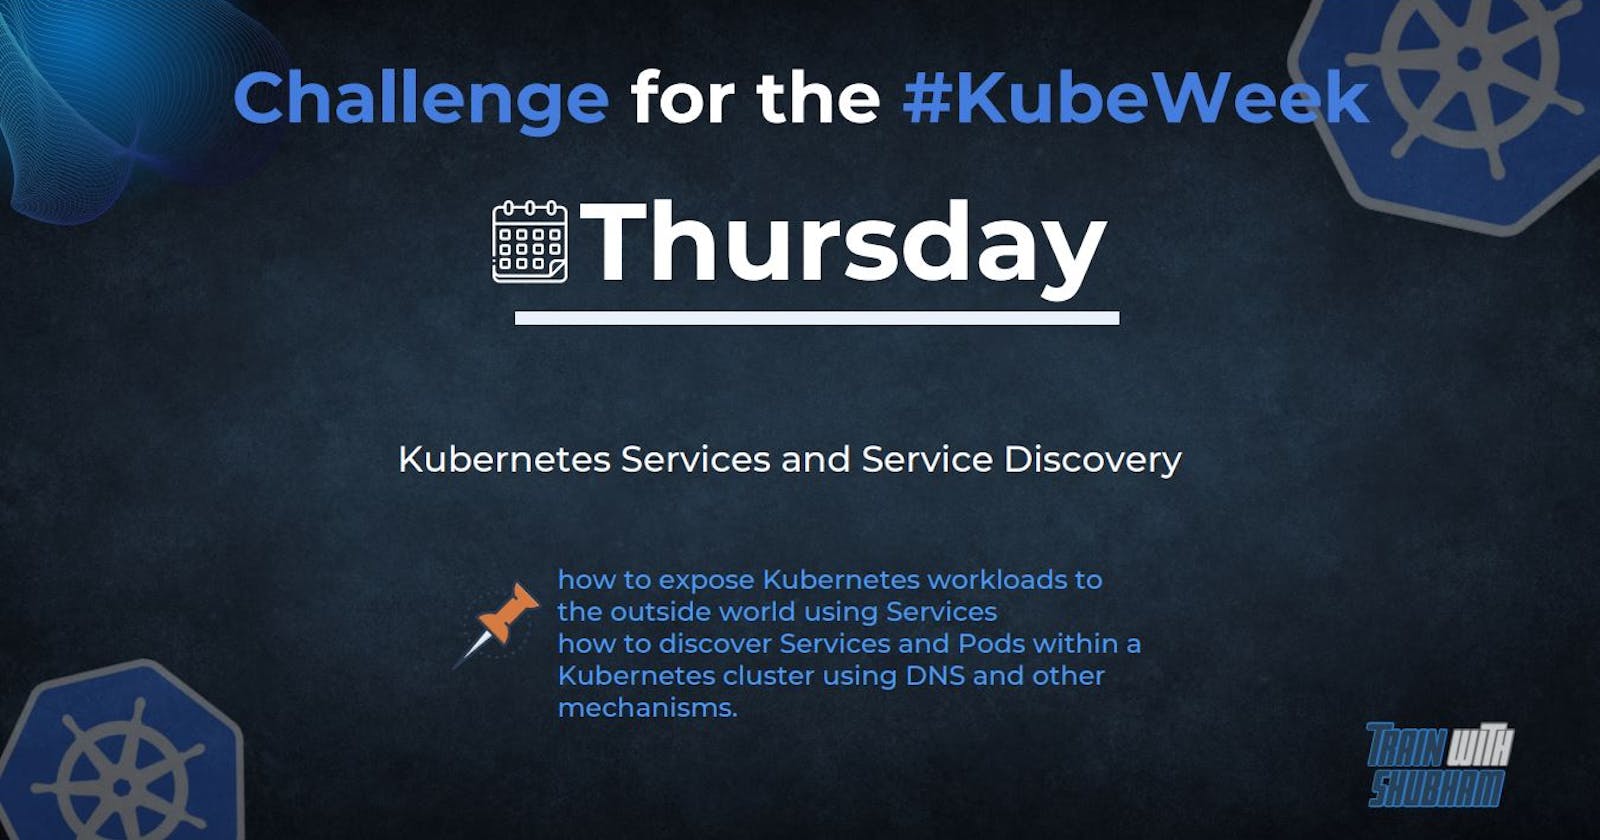 Kubernetes Services and Service Discovery